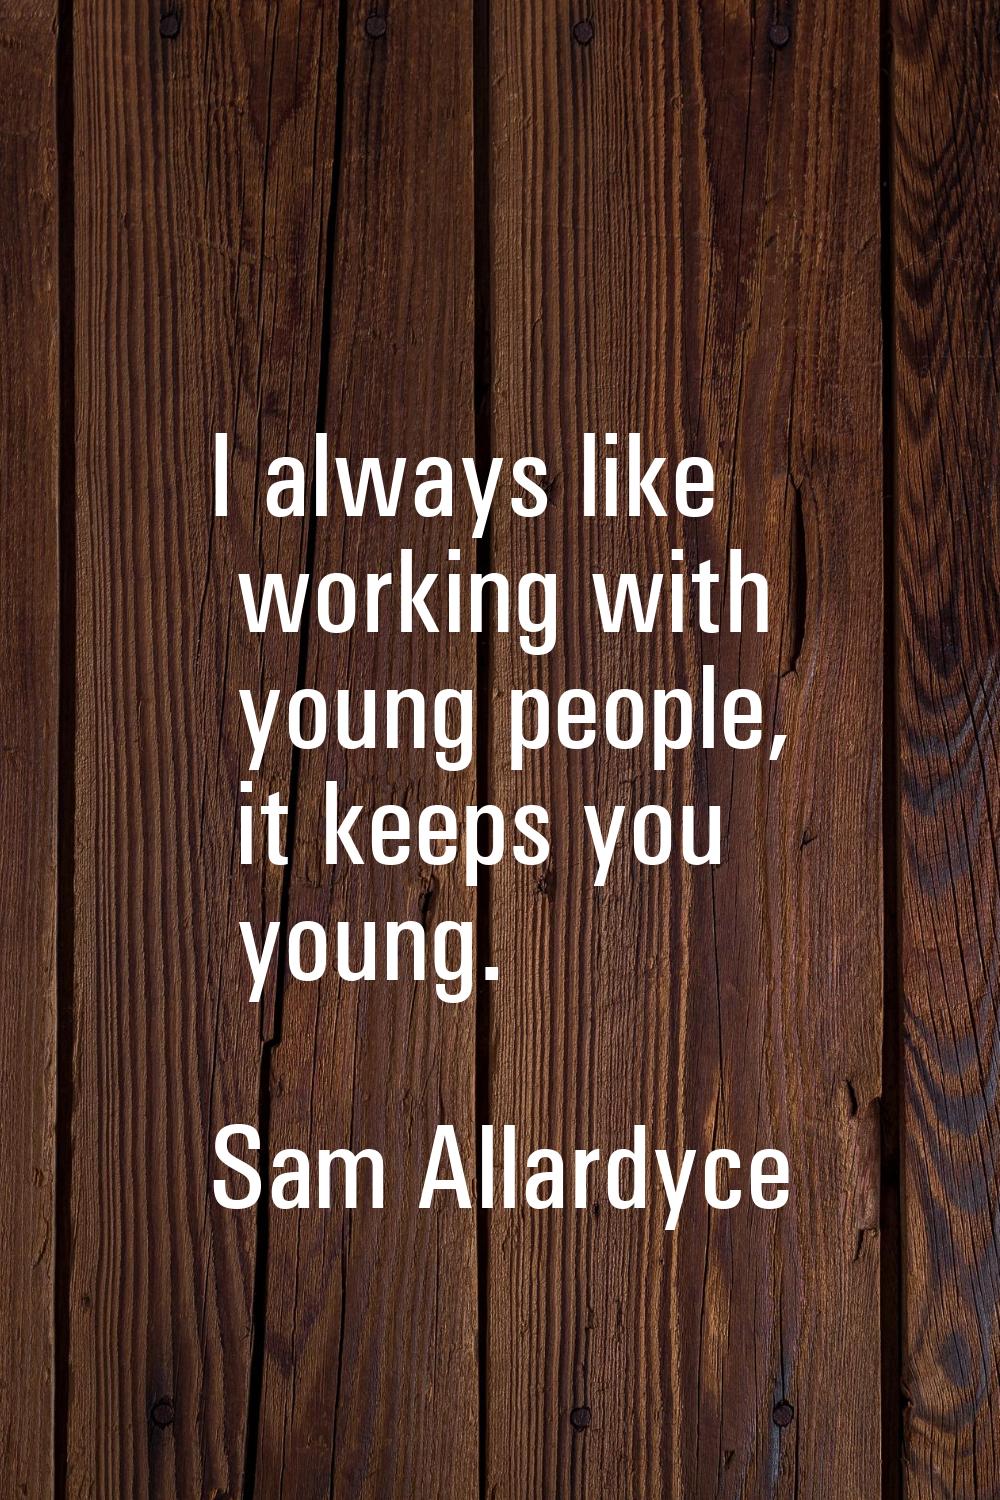 I always like working with young people, it keeps you young.